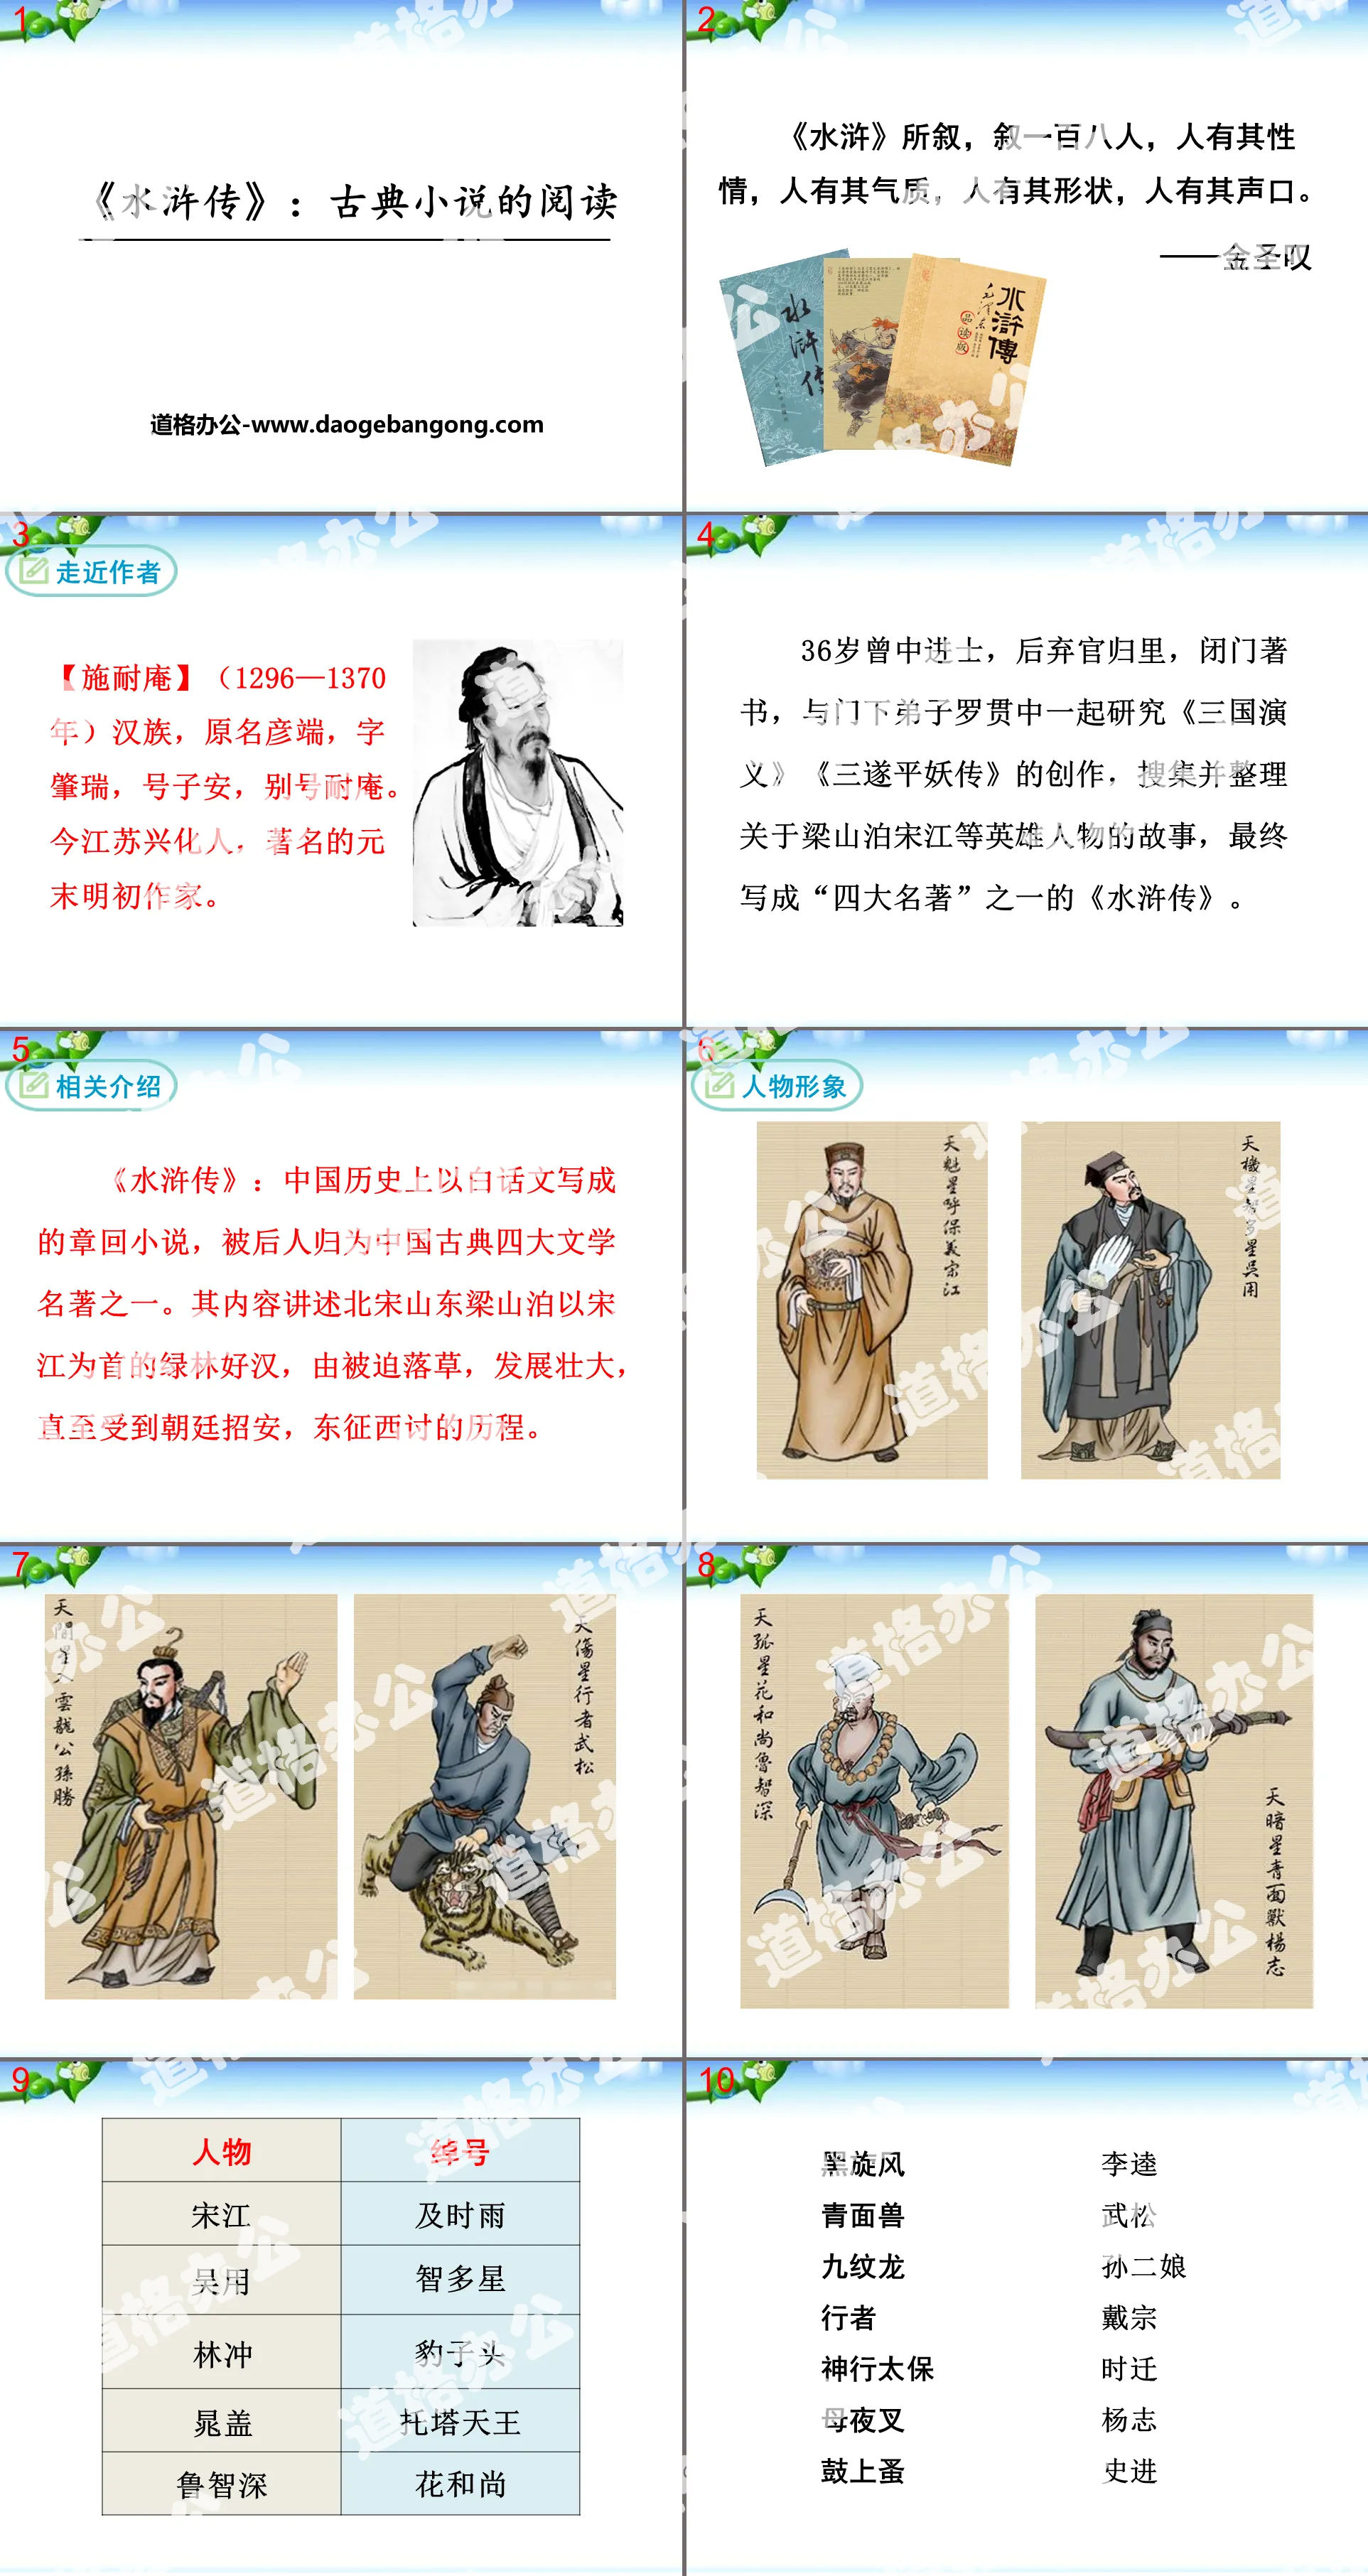 Reading PPT of the classic novel "Water Margin"